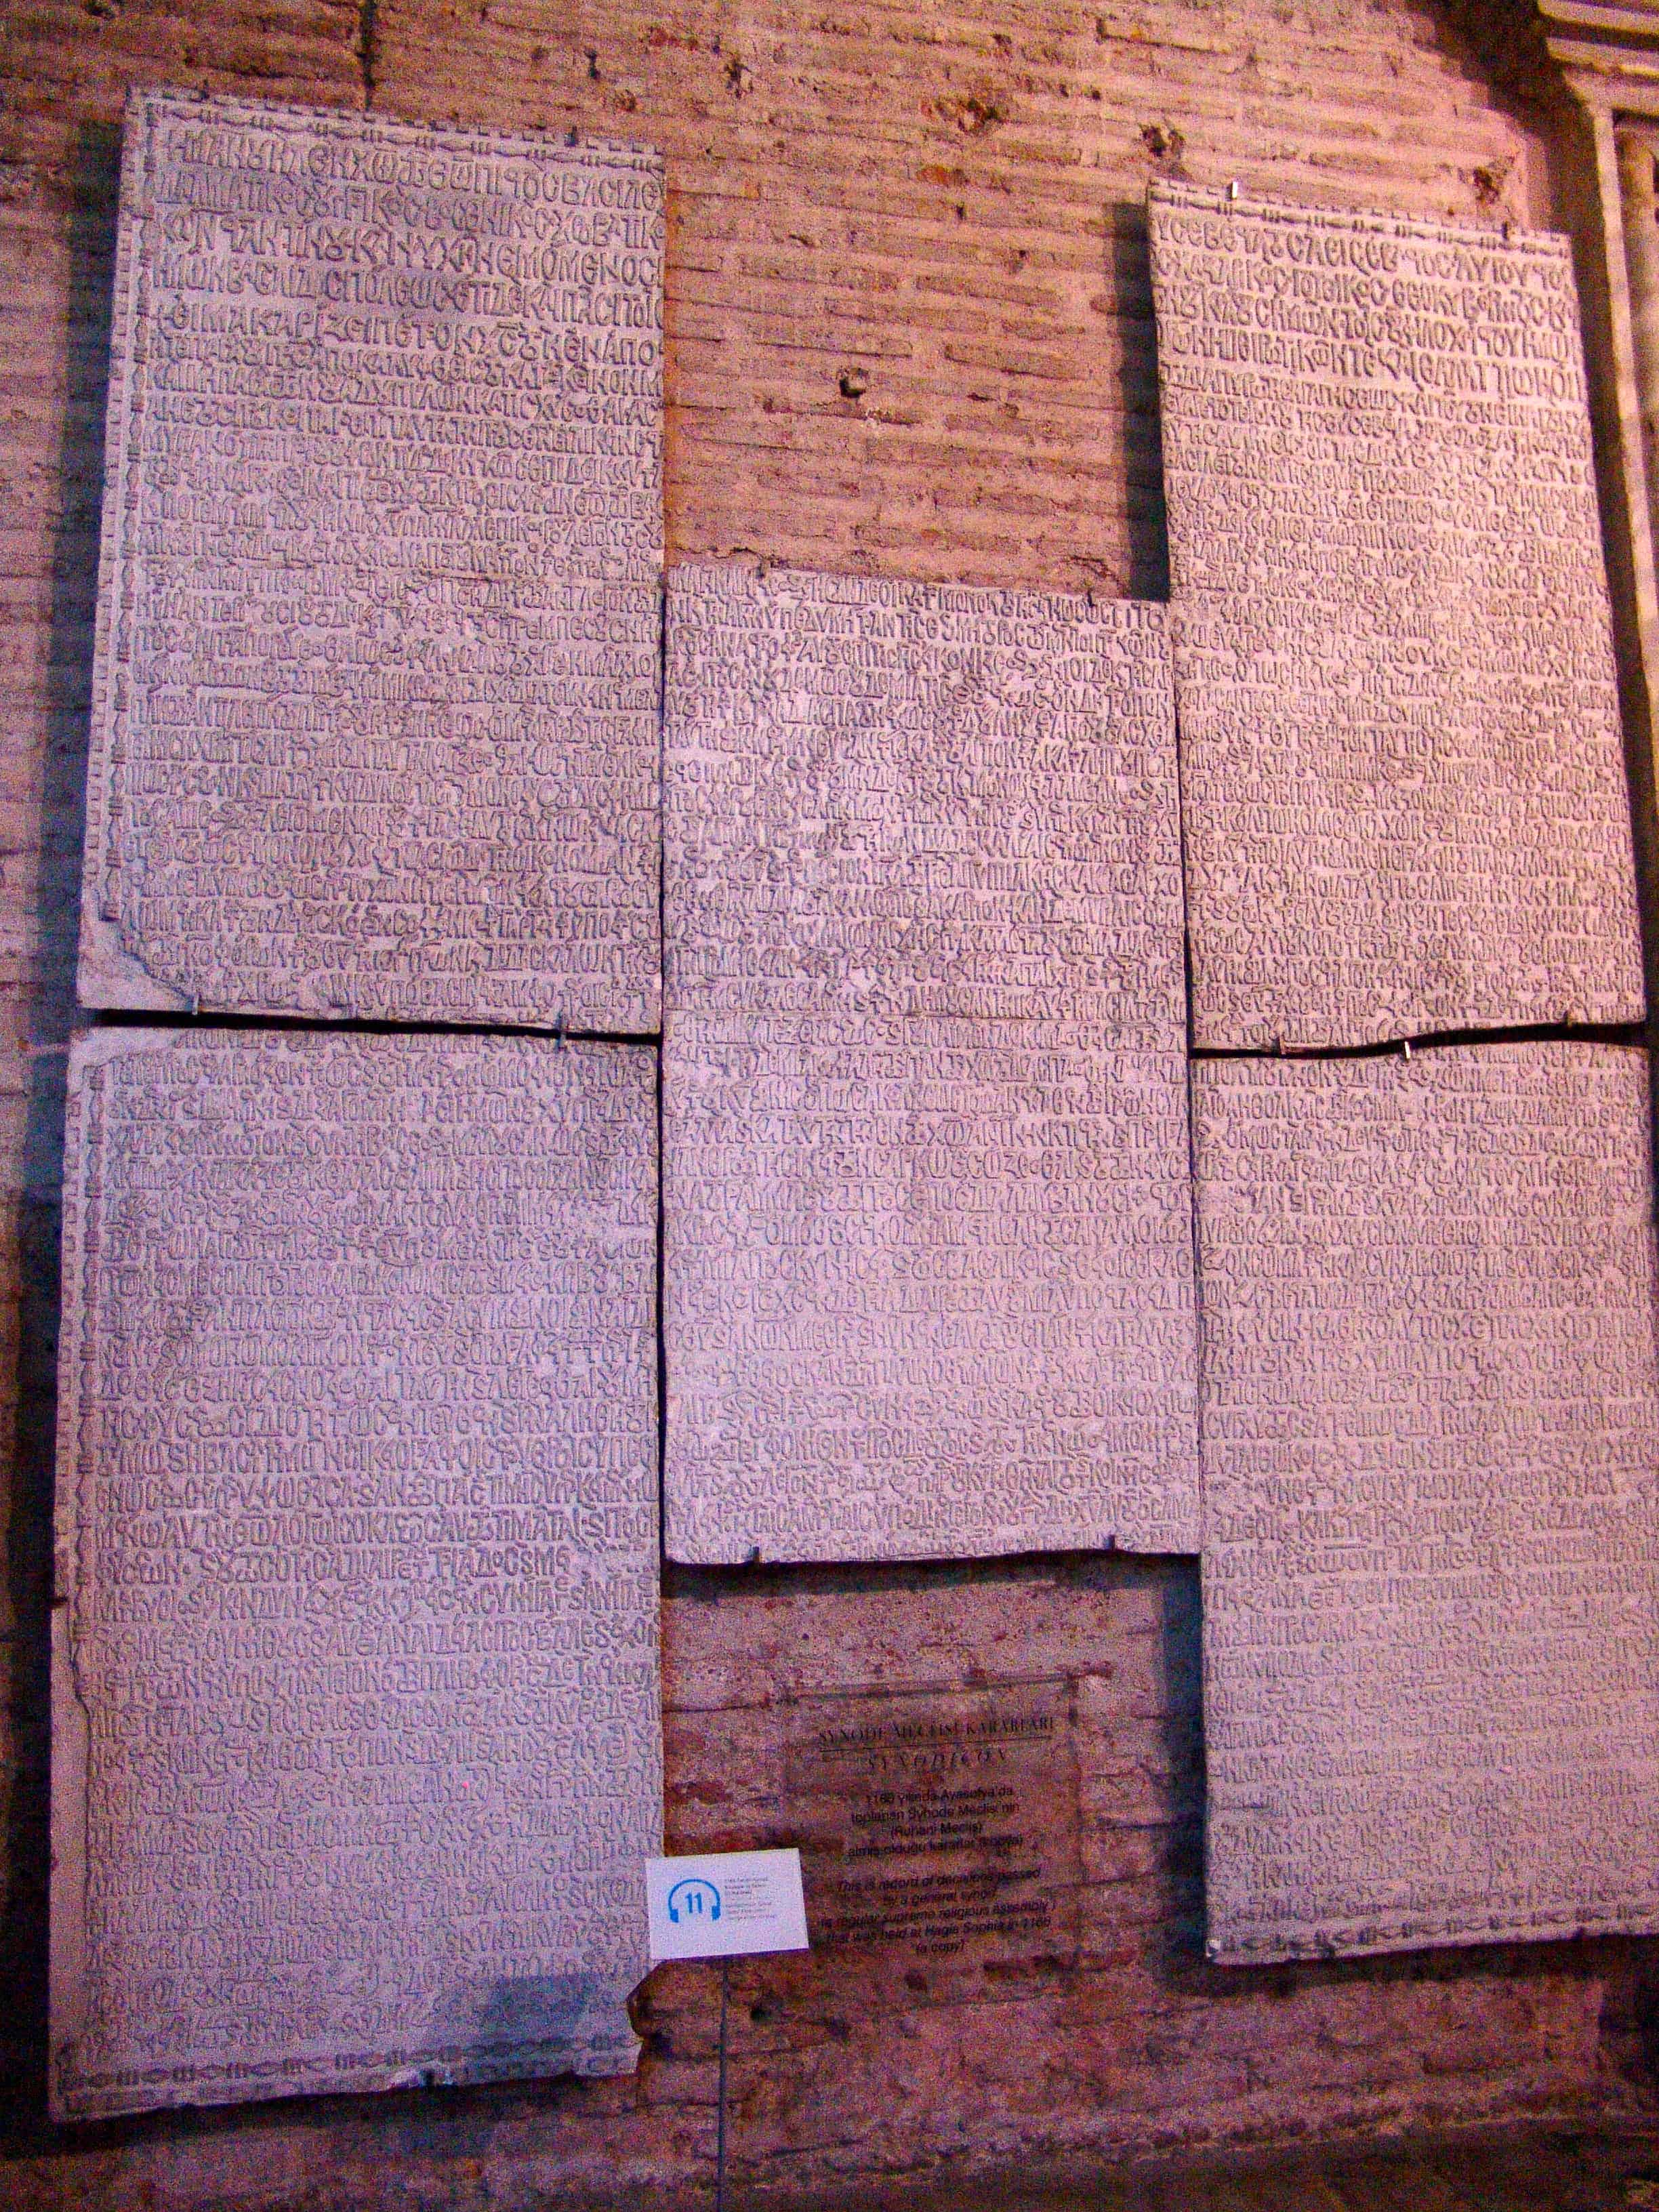 Stone tablets with Greek inscriptions at Hagia Sophia in Istanbul, Turkey